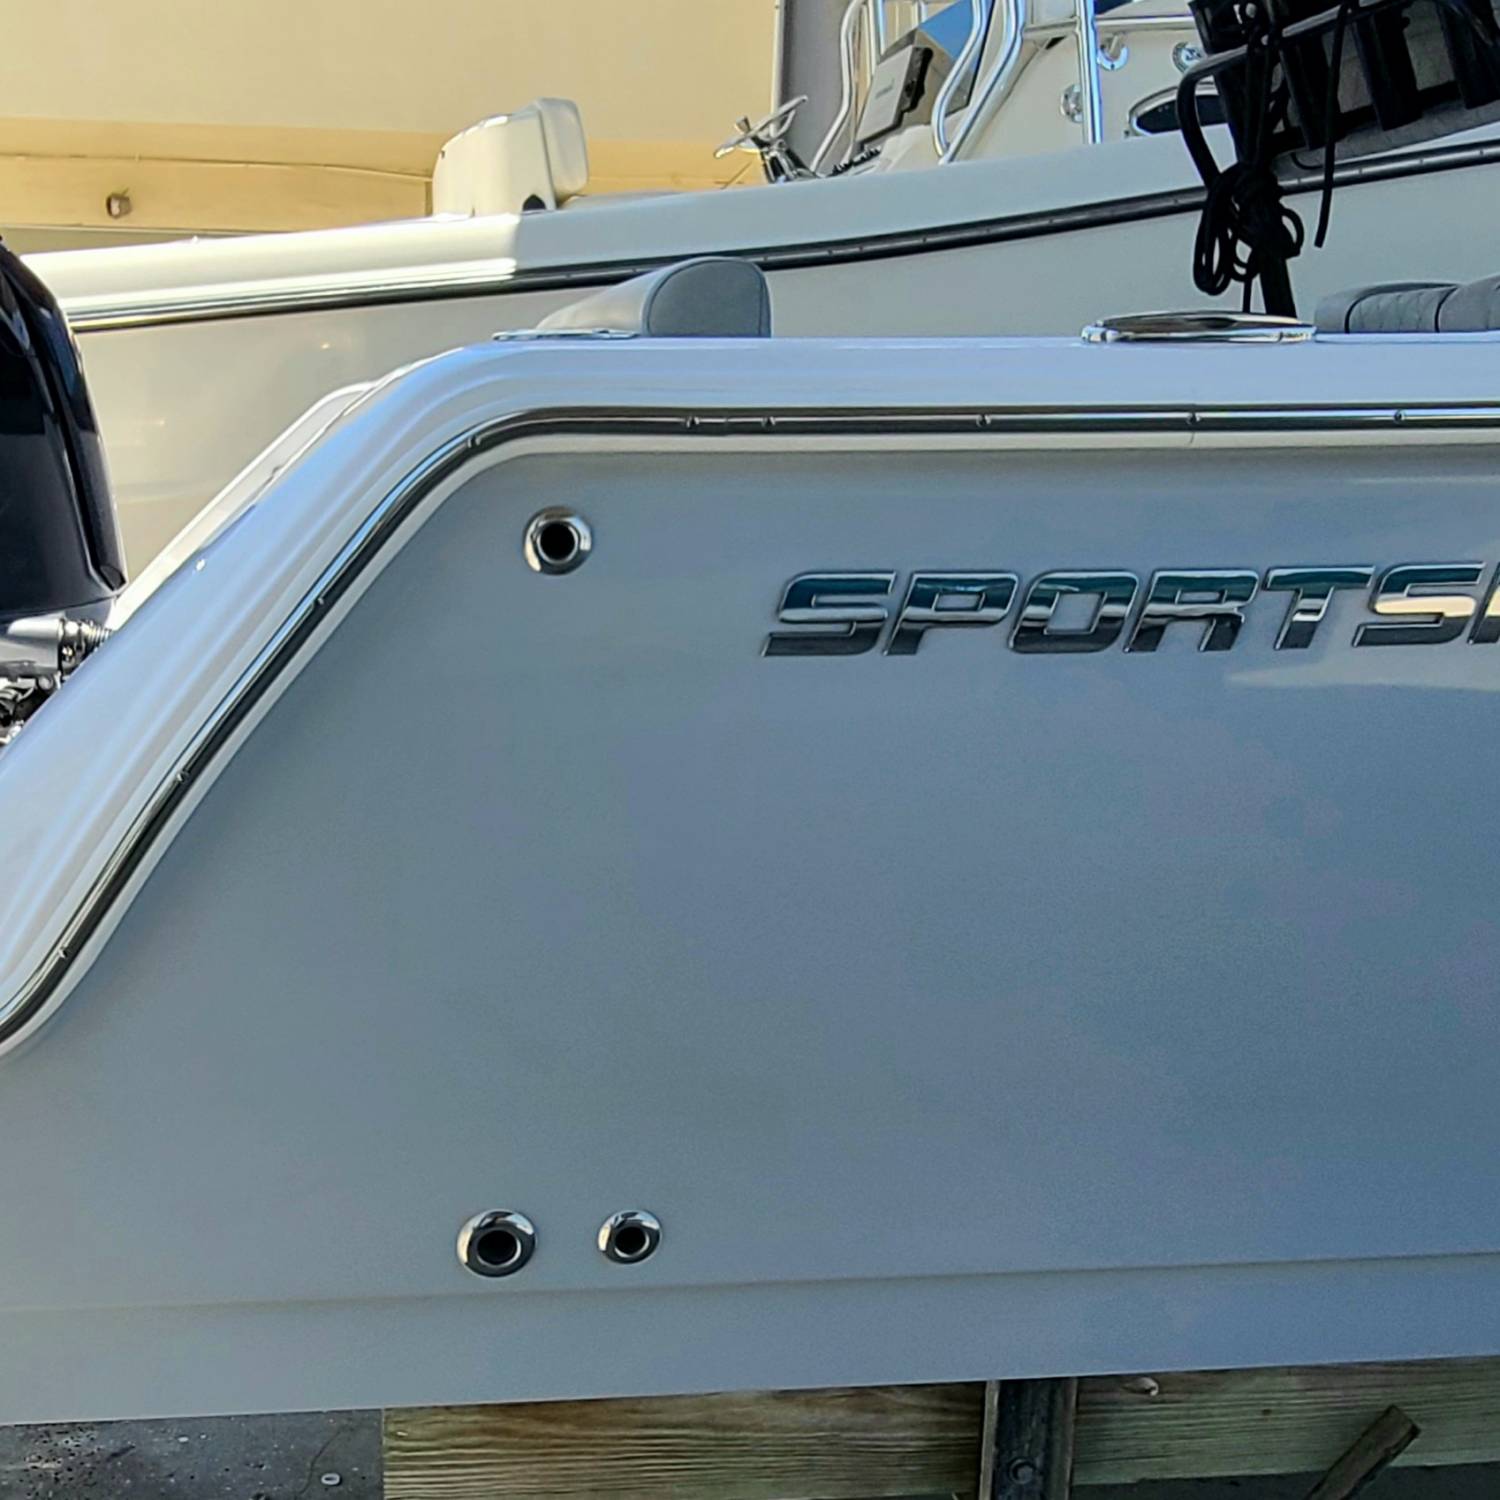 Title: 232 with 250SHO - On board their Sportsman Open 232 Center Console - Location: Tierra verde. Participating in the Photo Contest #SportsmanMarch2023